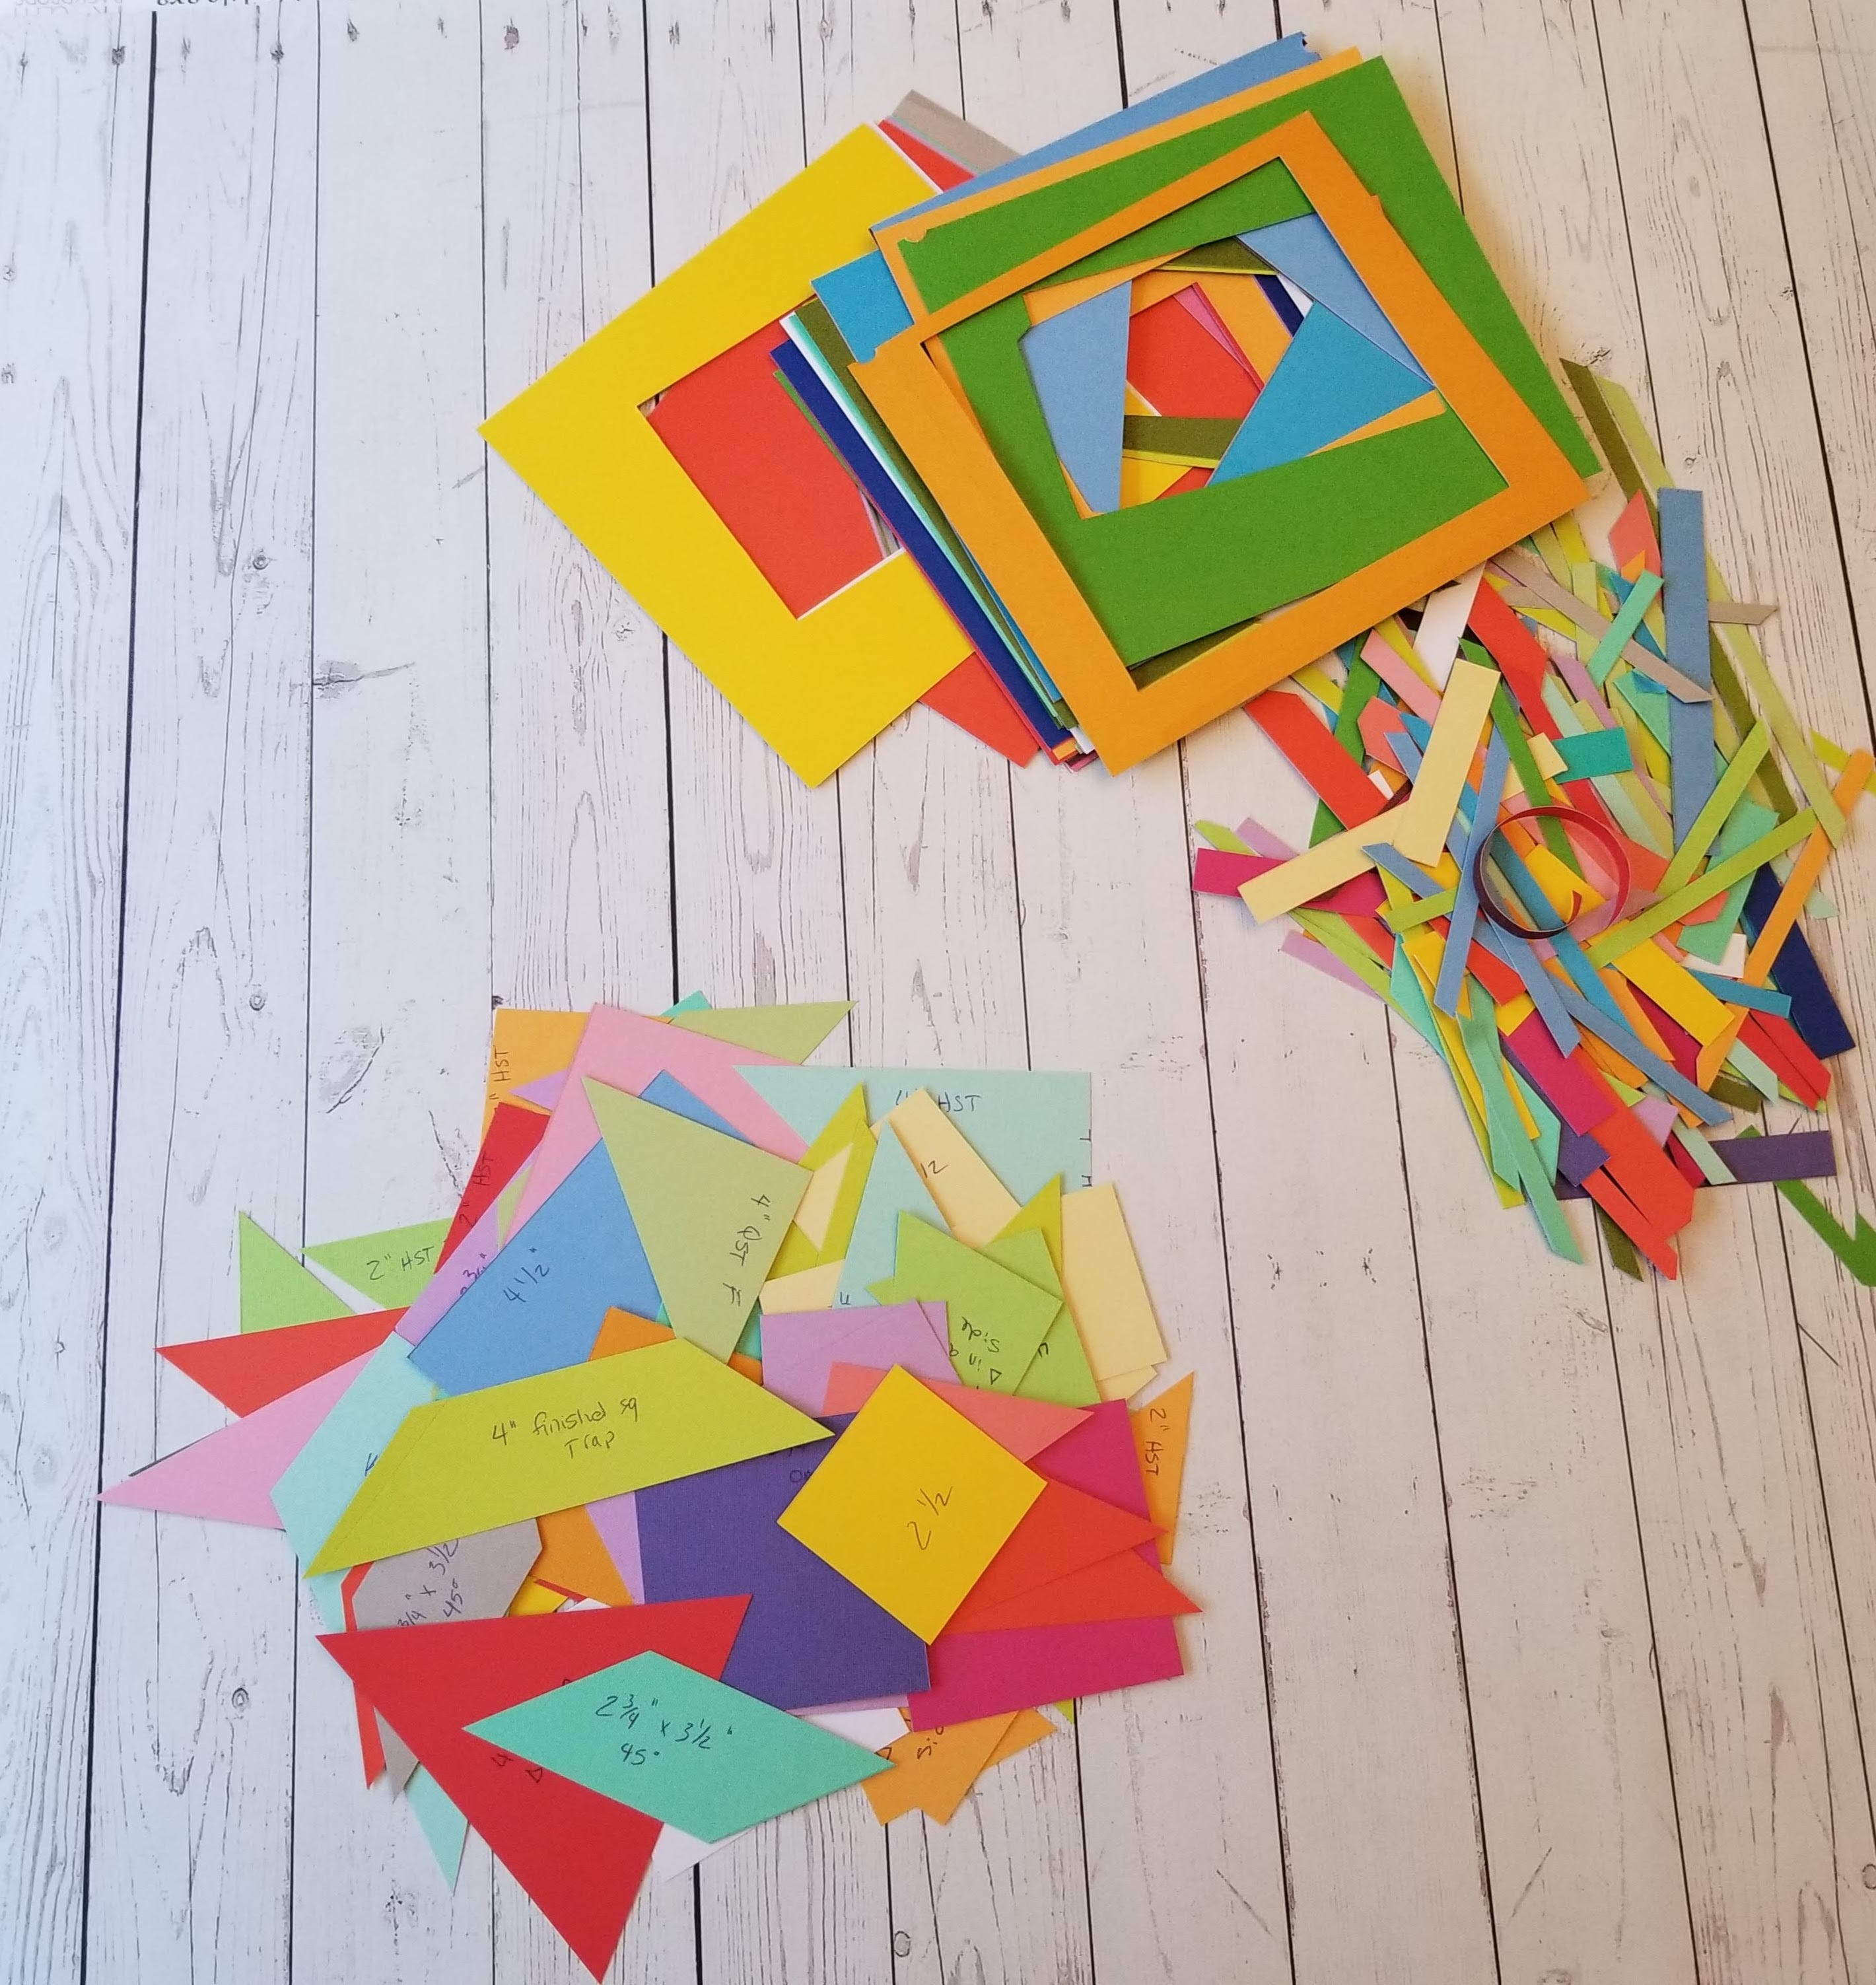 Multicolored shapes next to paper scraps on wood backdrop